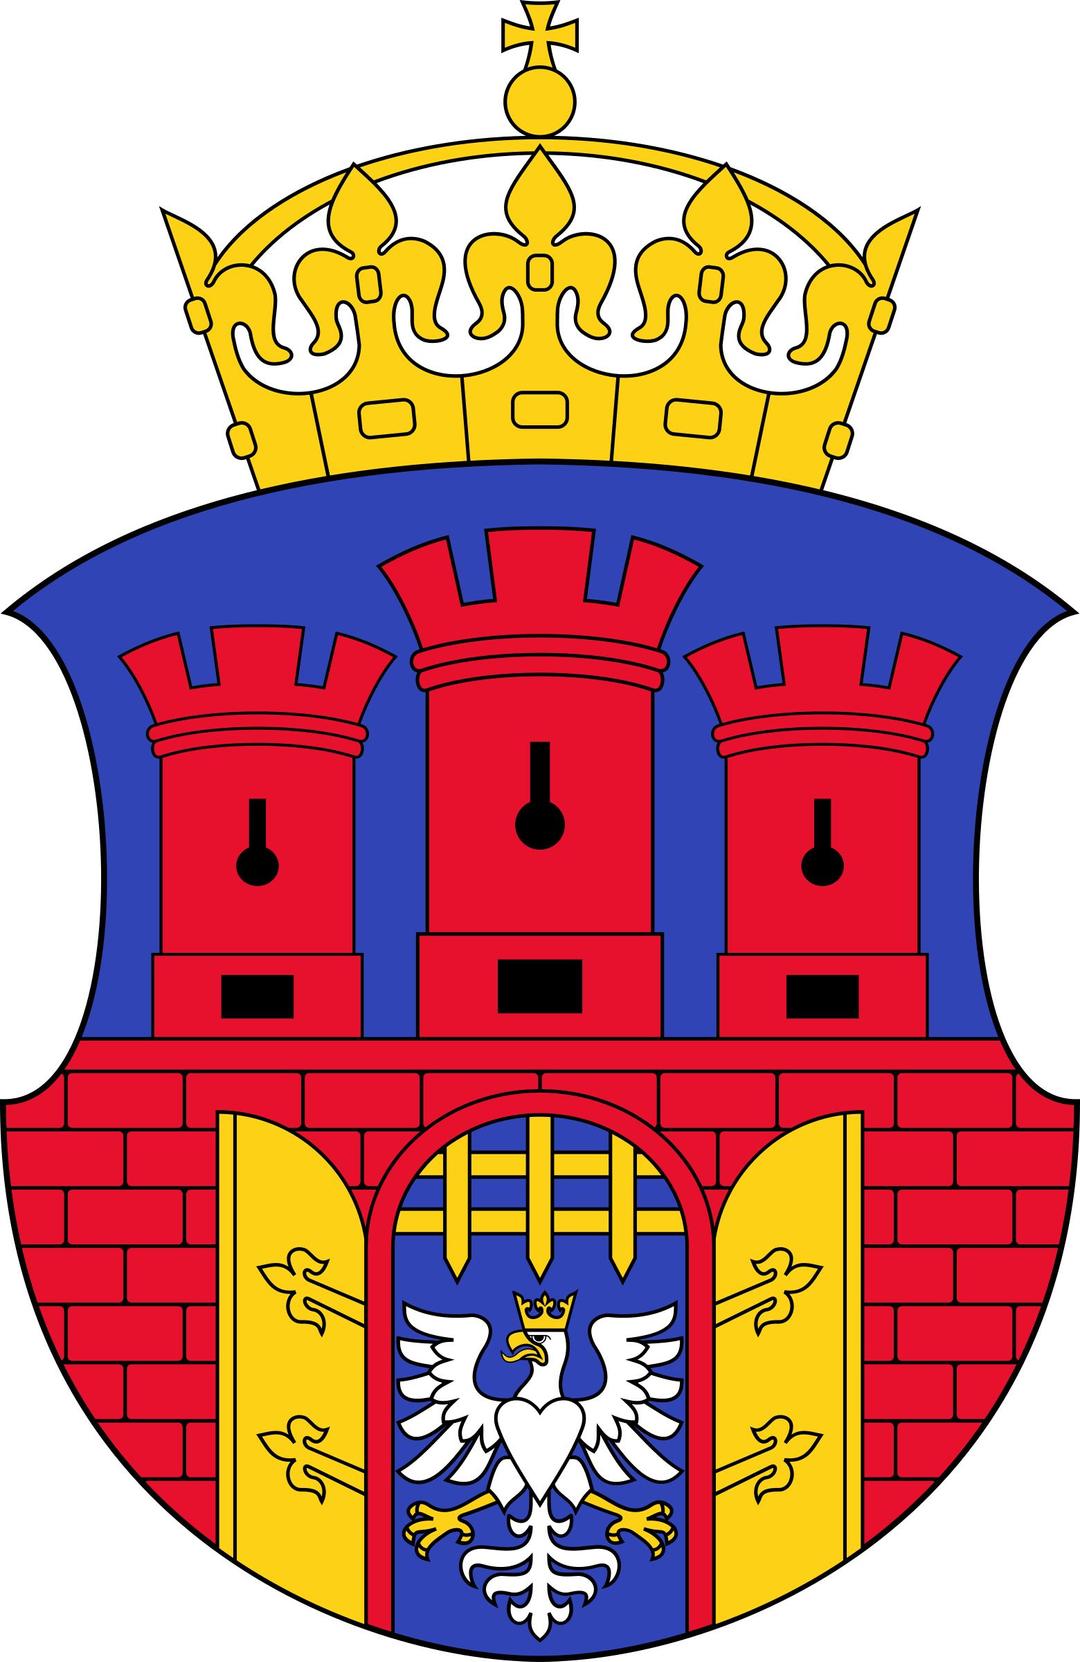 Coat of Arms of Cracow png transparent